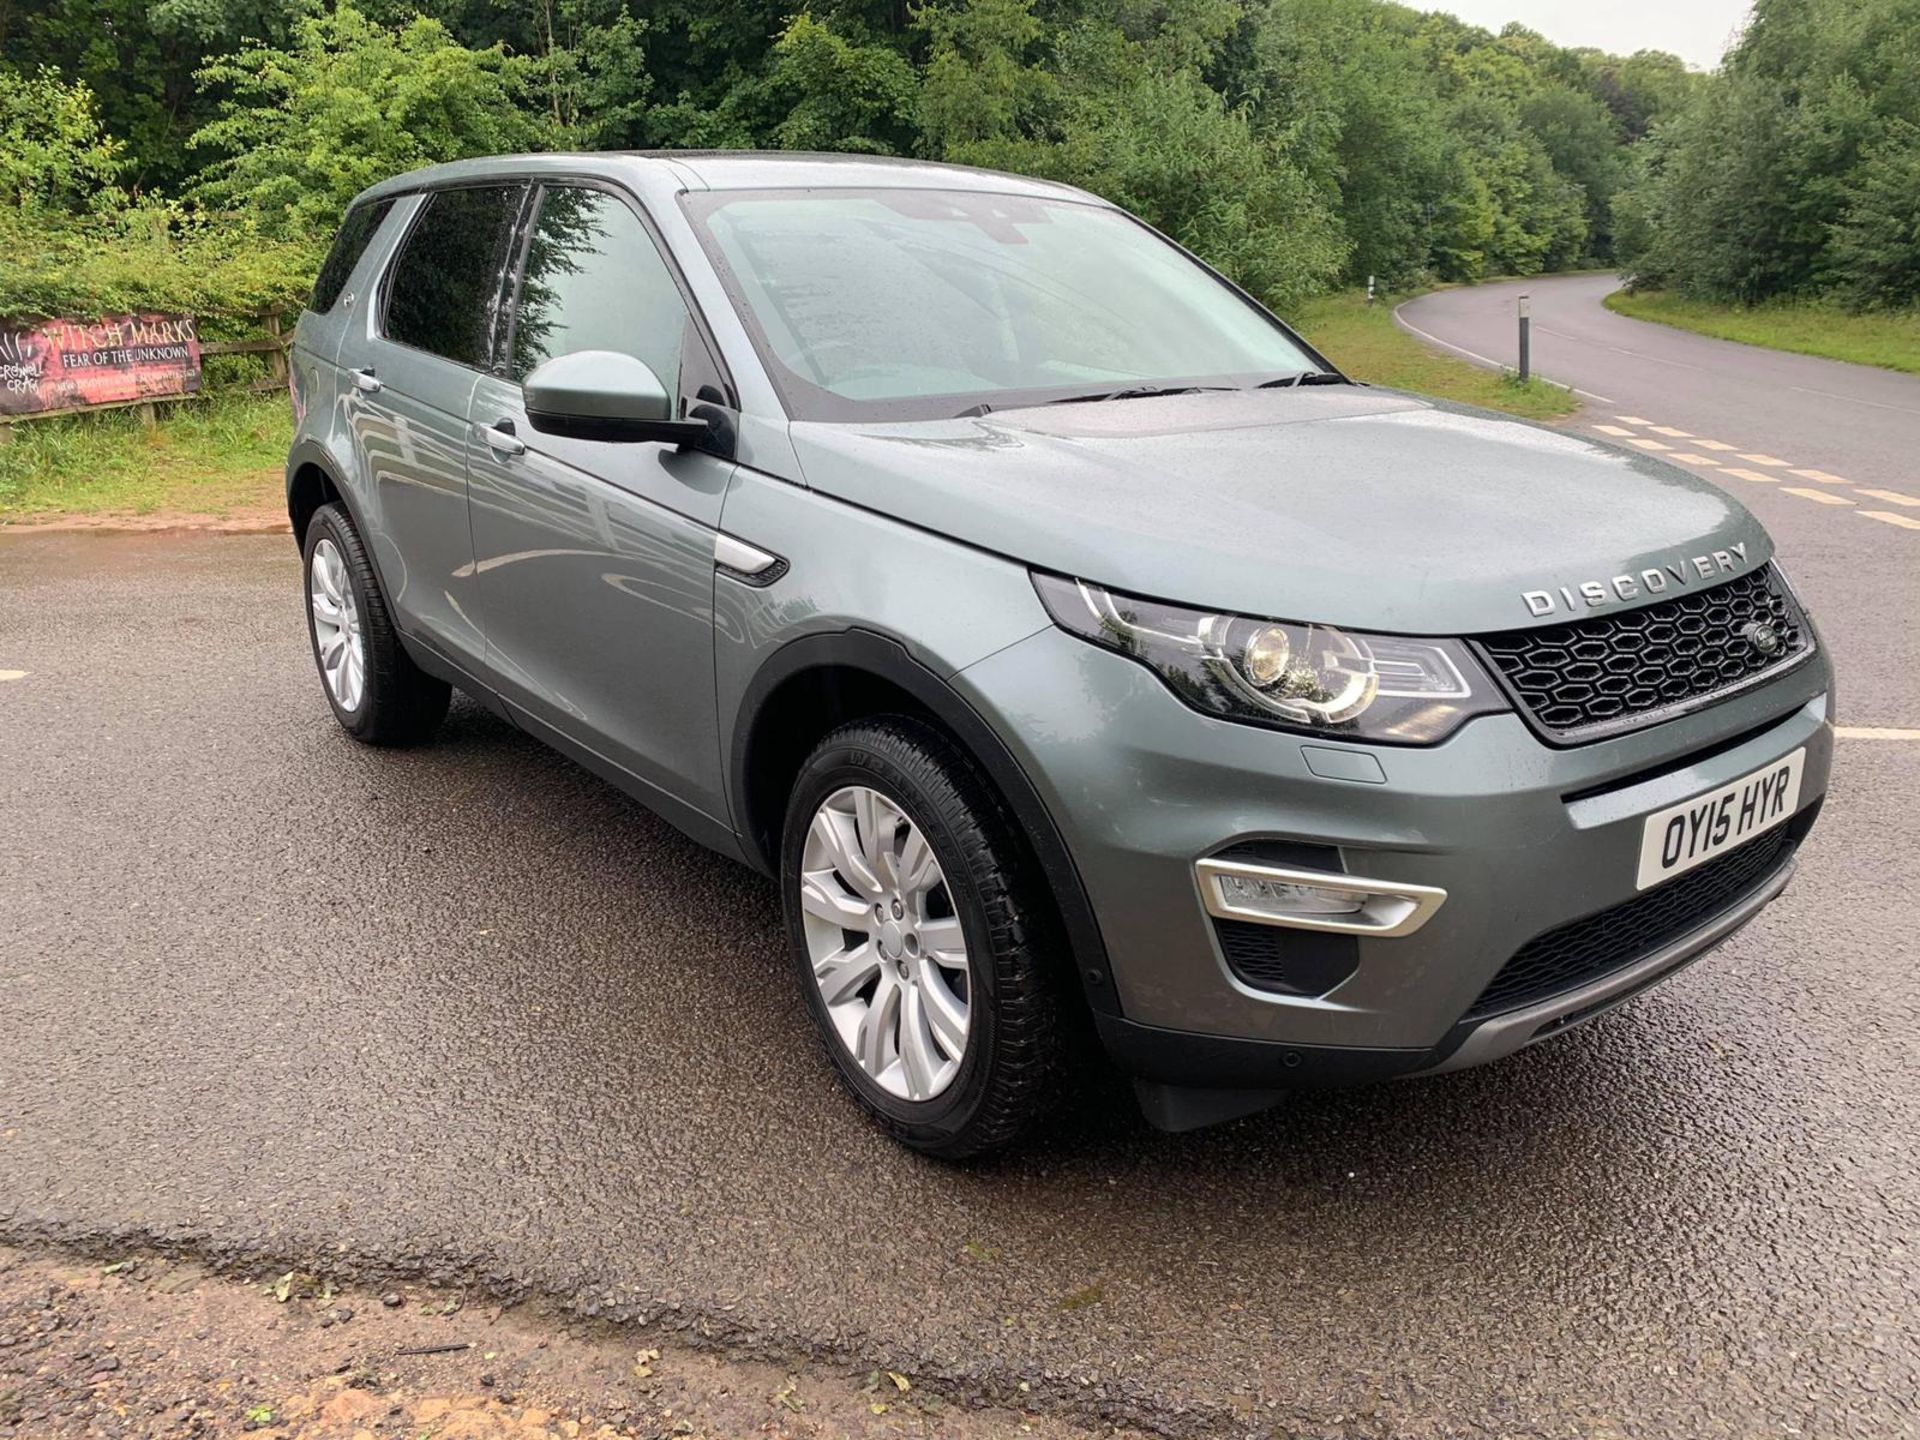 2015/15 REG LAND ROVER DISCOVERY SPORT SD4 HSE LUXURY 2.2 DIESEL AUTOMATIC, SHOWING 2 FORMER KEEPERS - Image 2 of 17